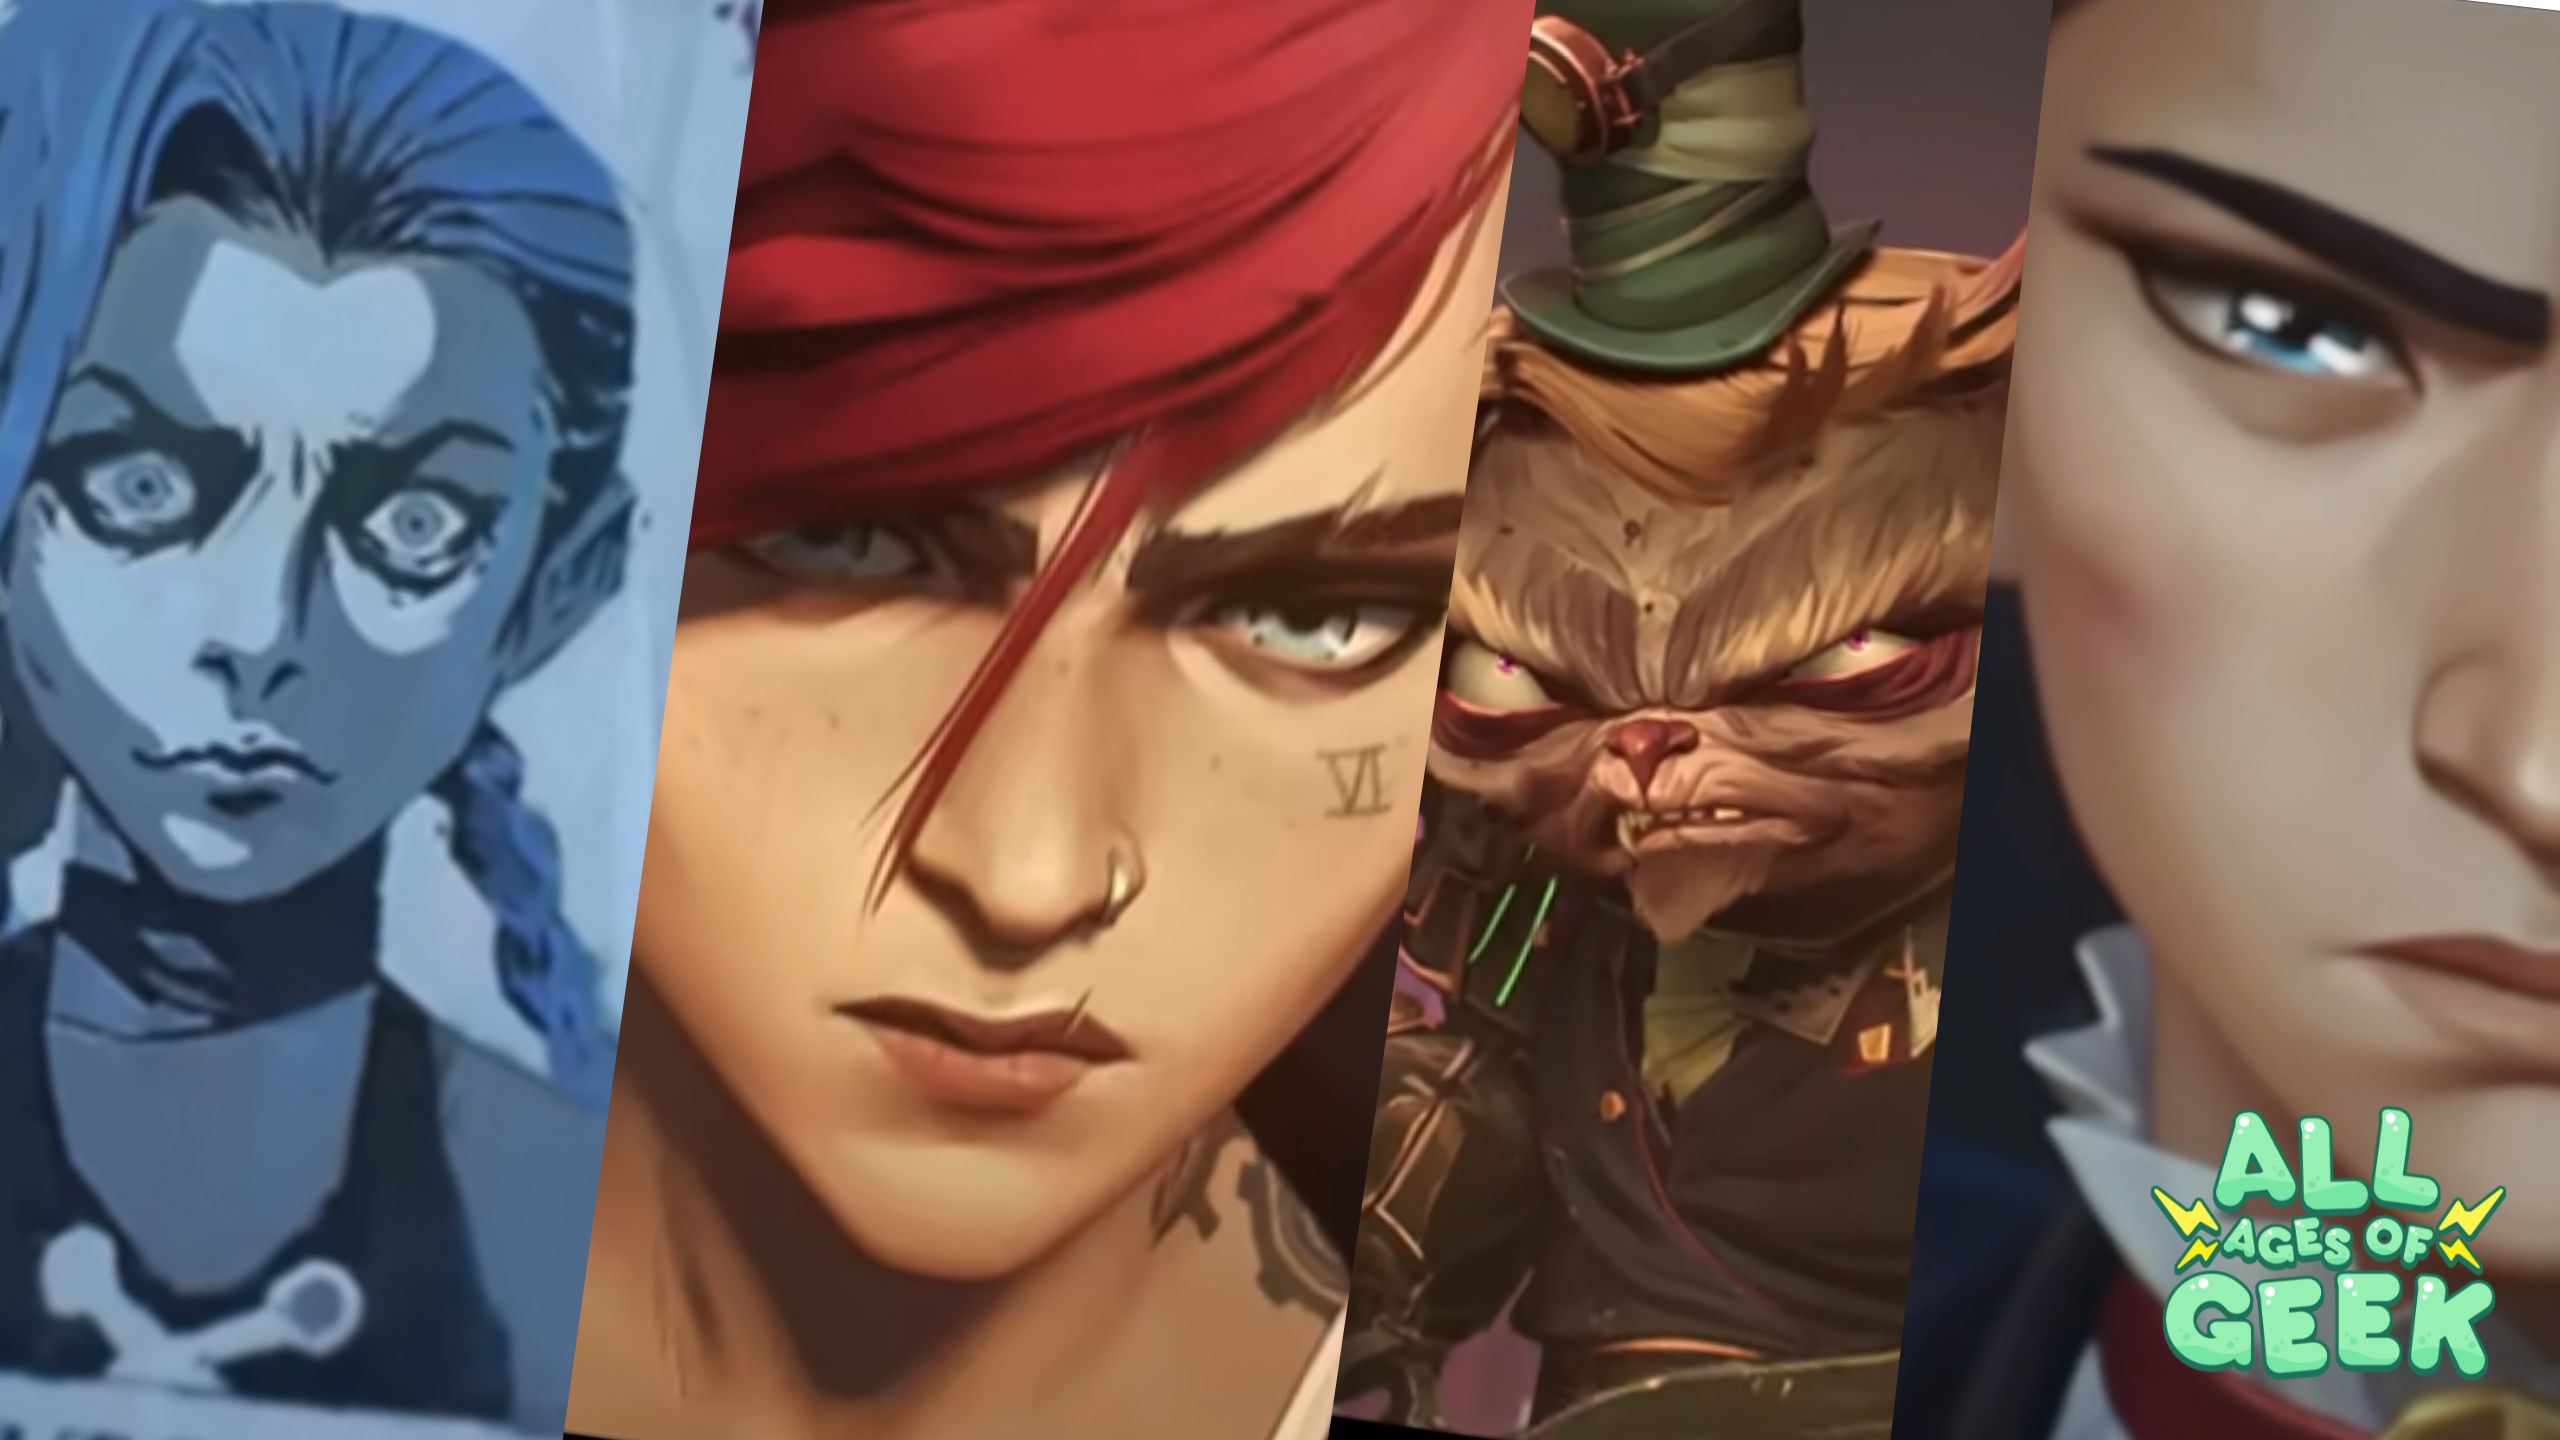 "Arcane Season 2 characters lineup featuring striking visuals of the main cast from the animated series. From left to right, a sketch of Jinx, Vi with her intense gaze, a fierce-looking Teemo, and a stern Caitlyn, with the All Ages of Geek logo at the bottom right."